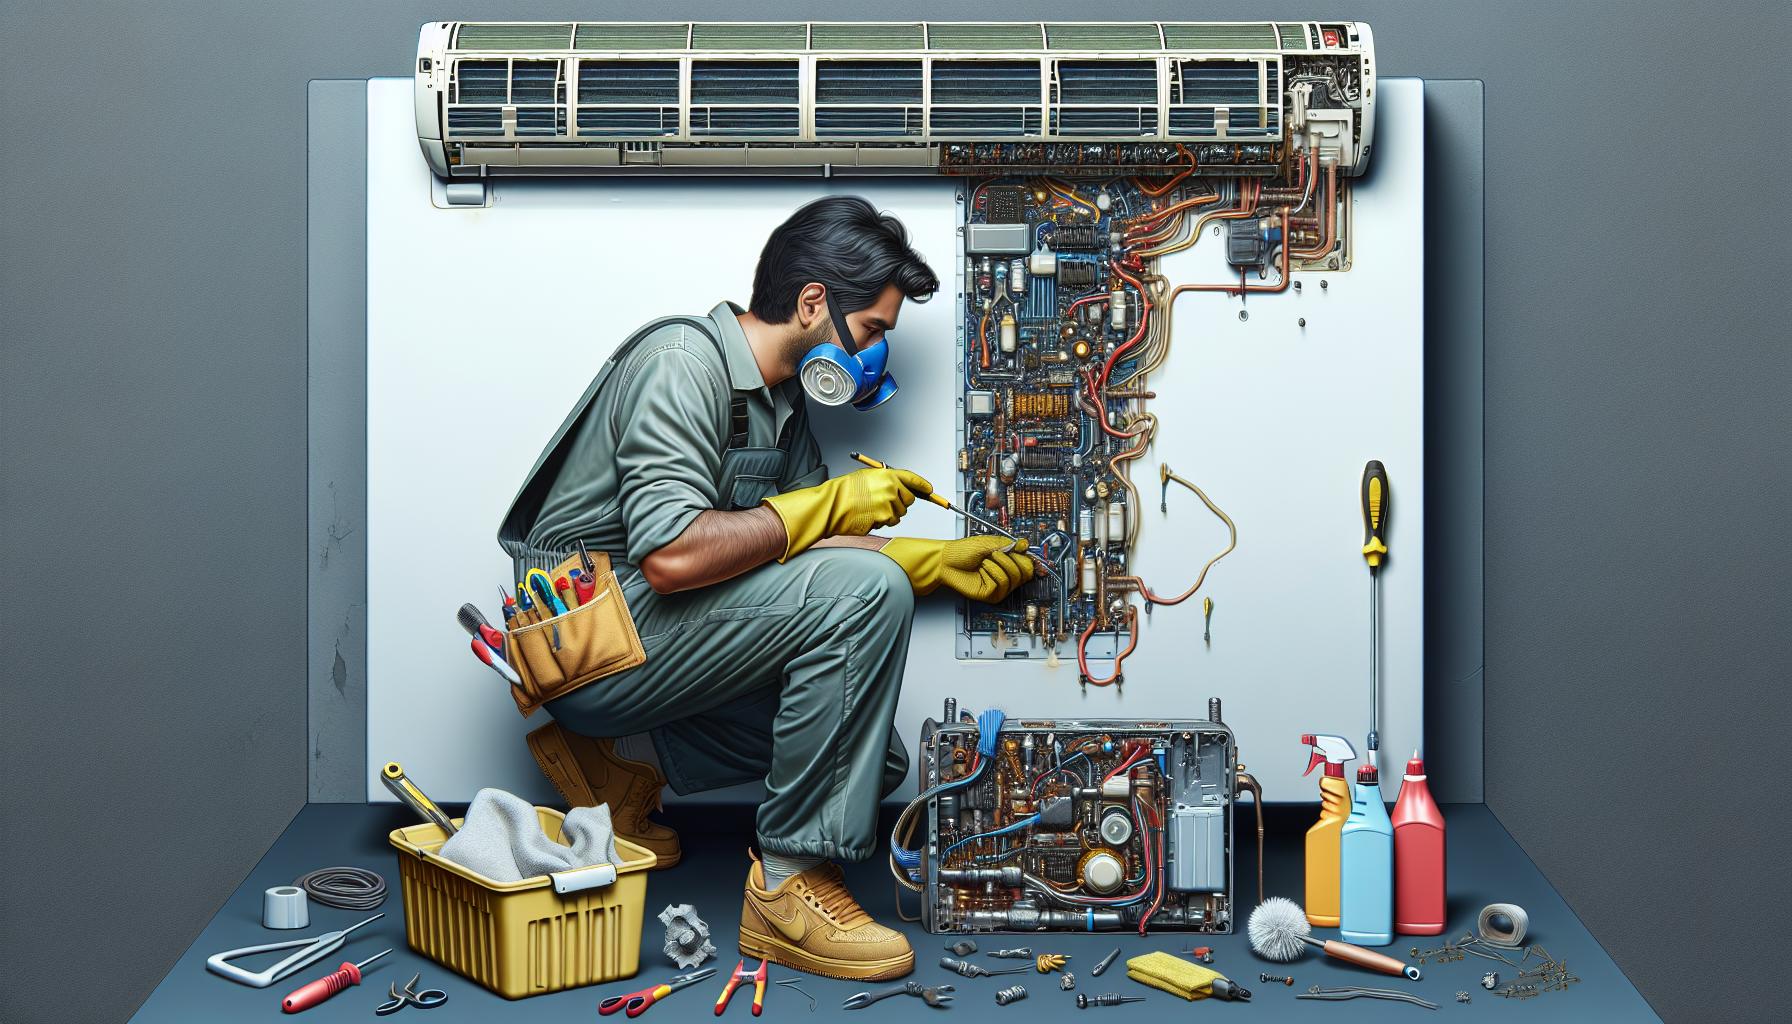 Electrician working on a circuit board repair.